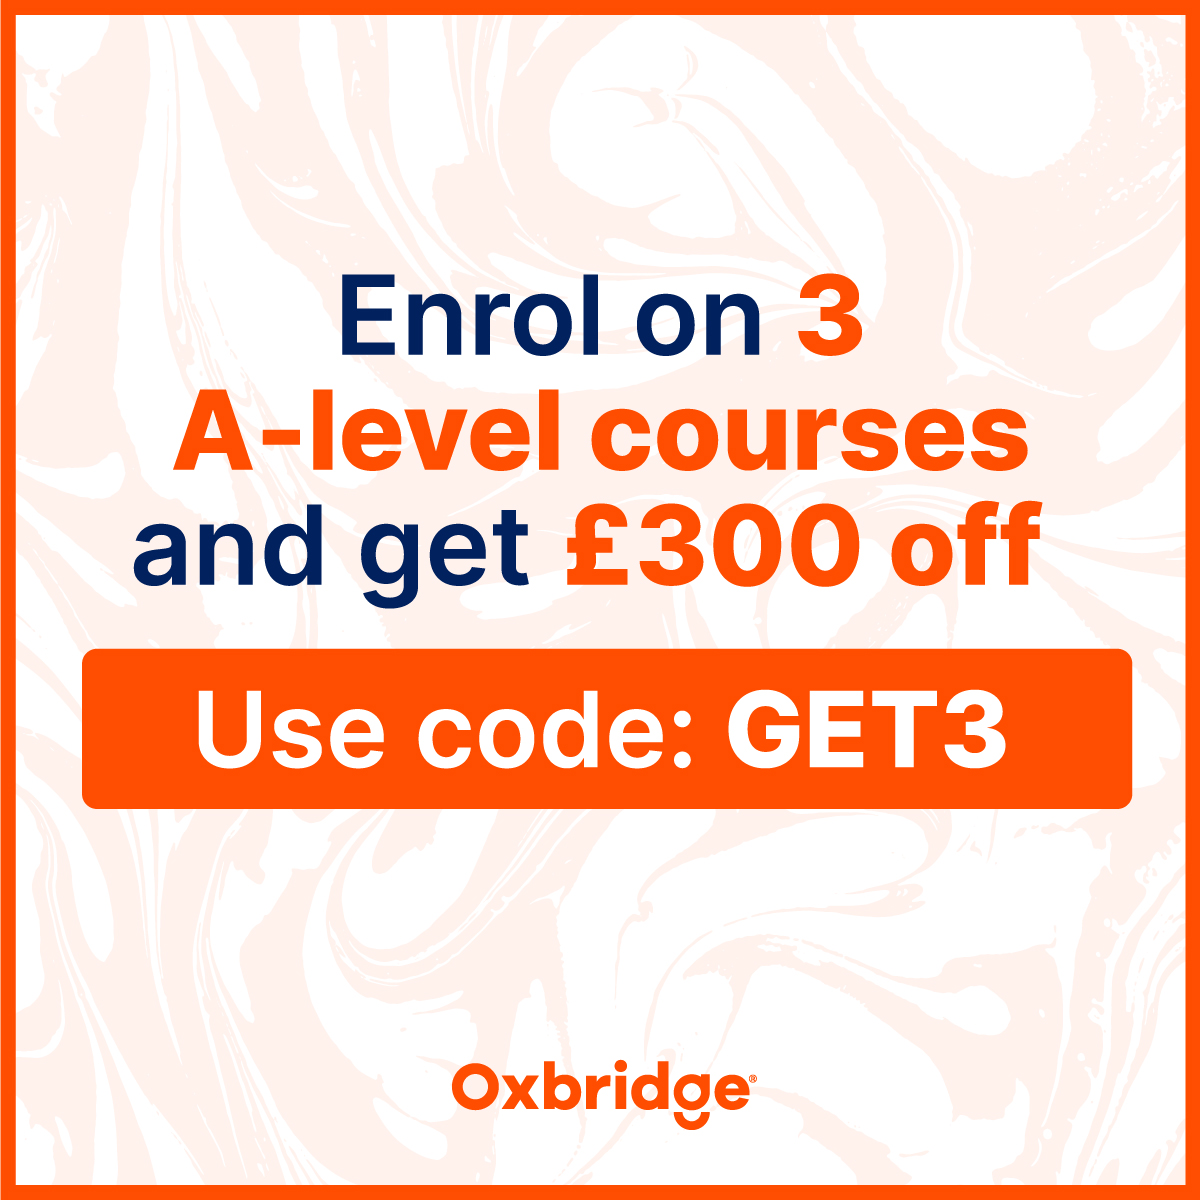 #DYK you can #study and save with #onlinelearning? We have discounts on our #Alevel courses now available - take a look at what you can study and get in touch for more details. ow.ly/NOuE50PBjIi #learnyourway